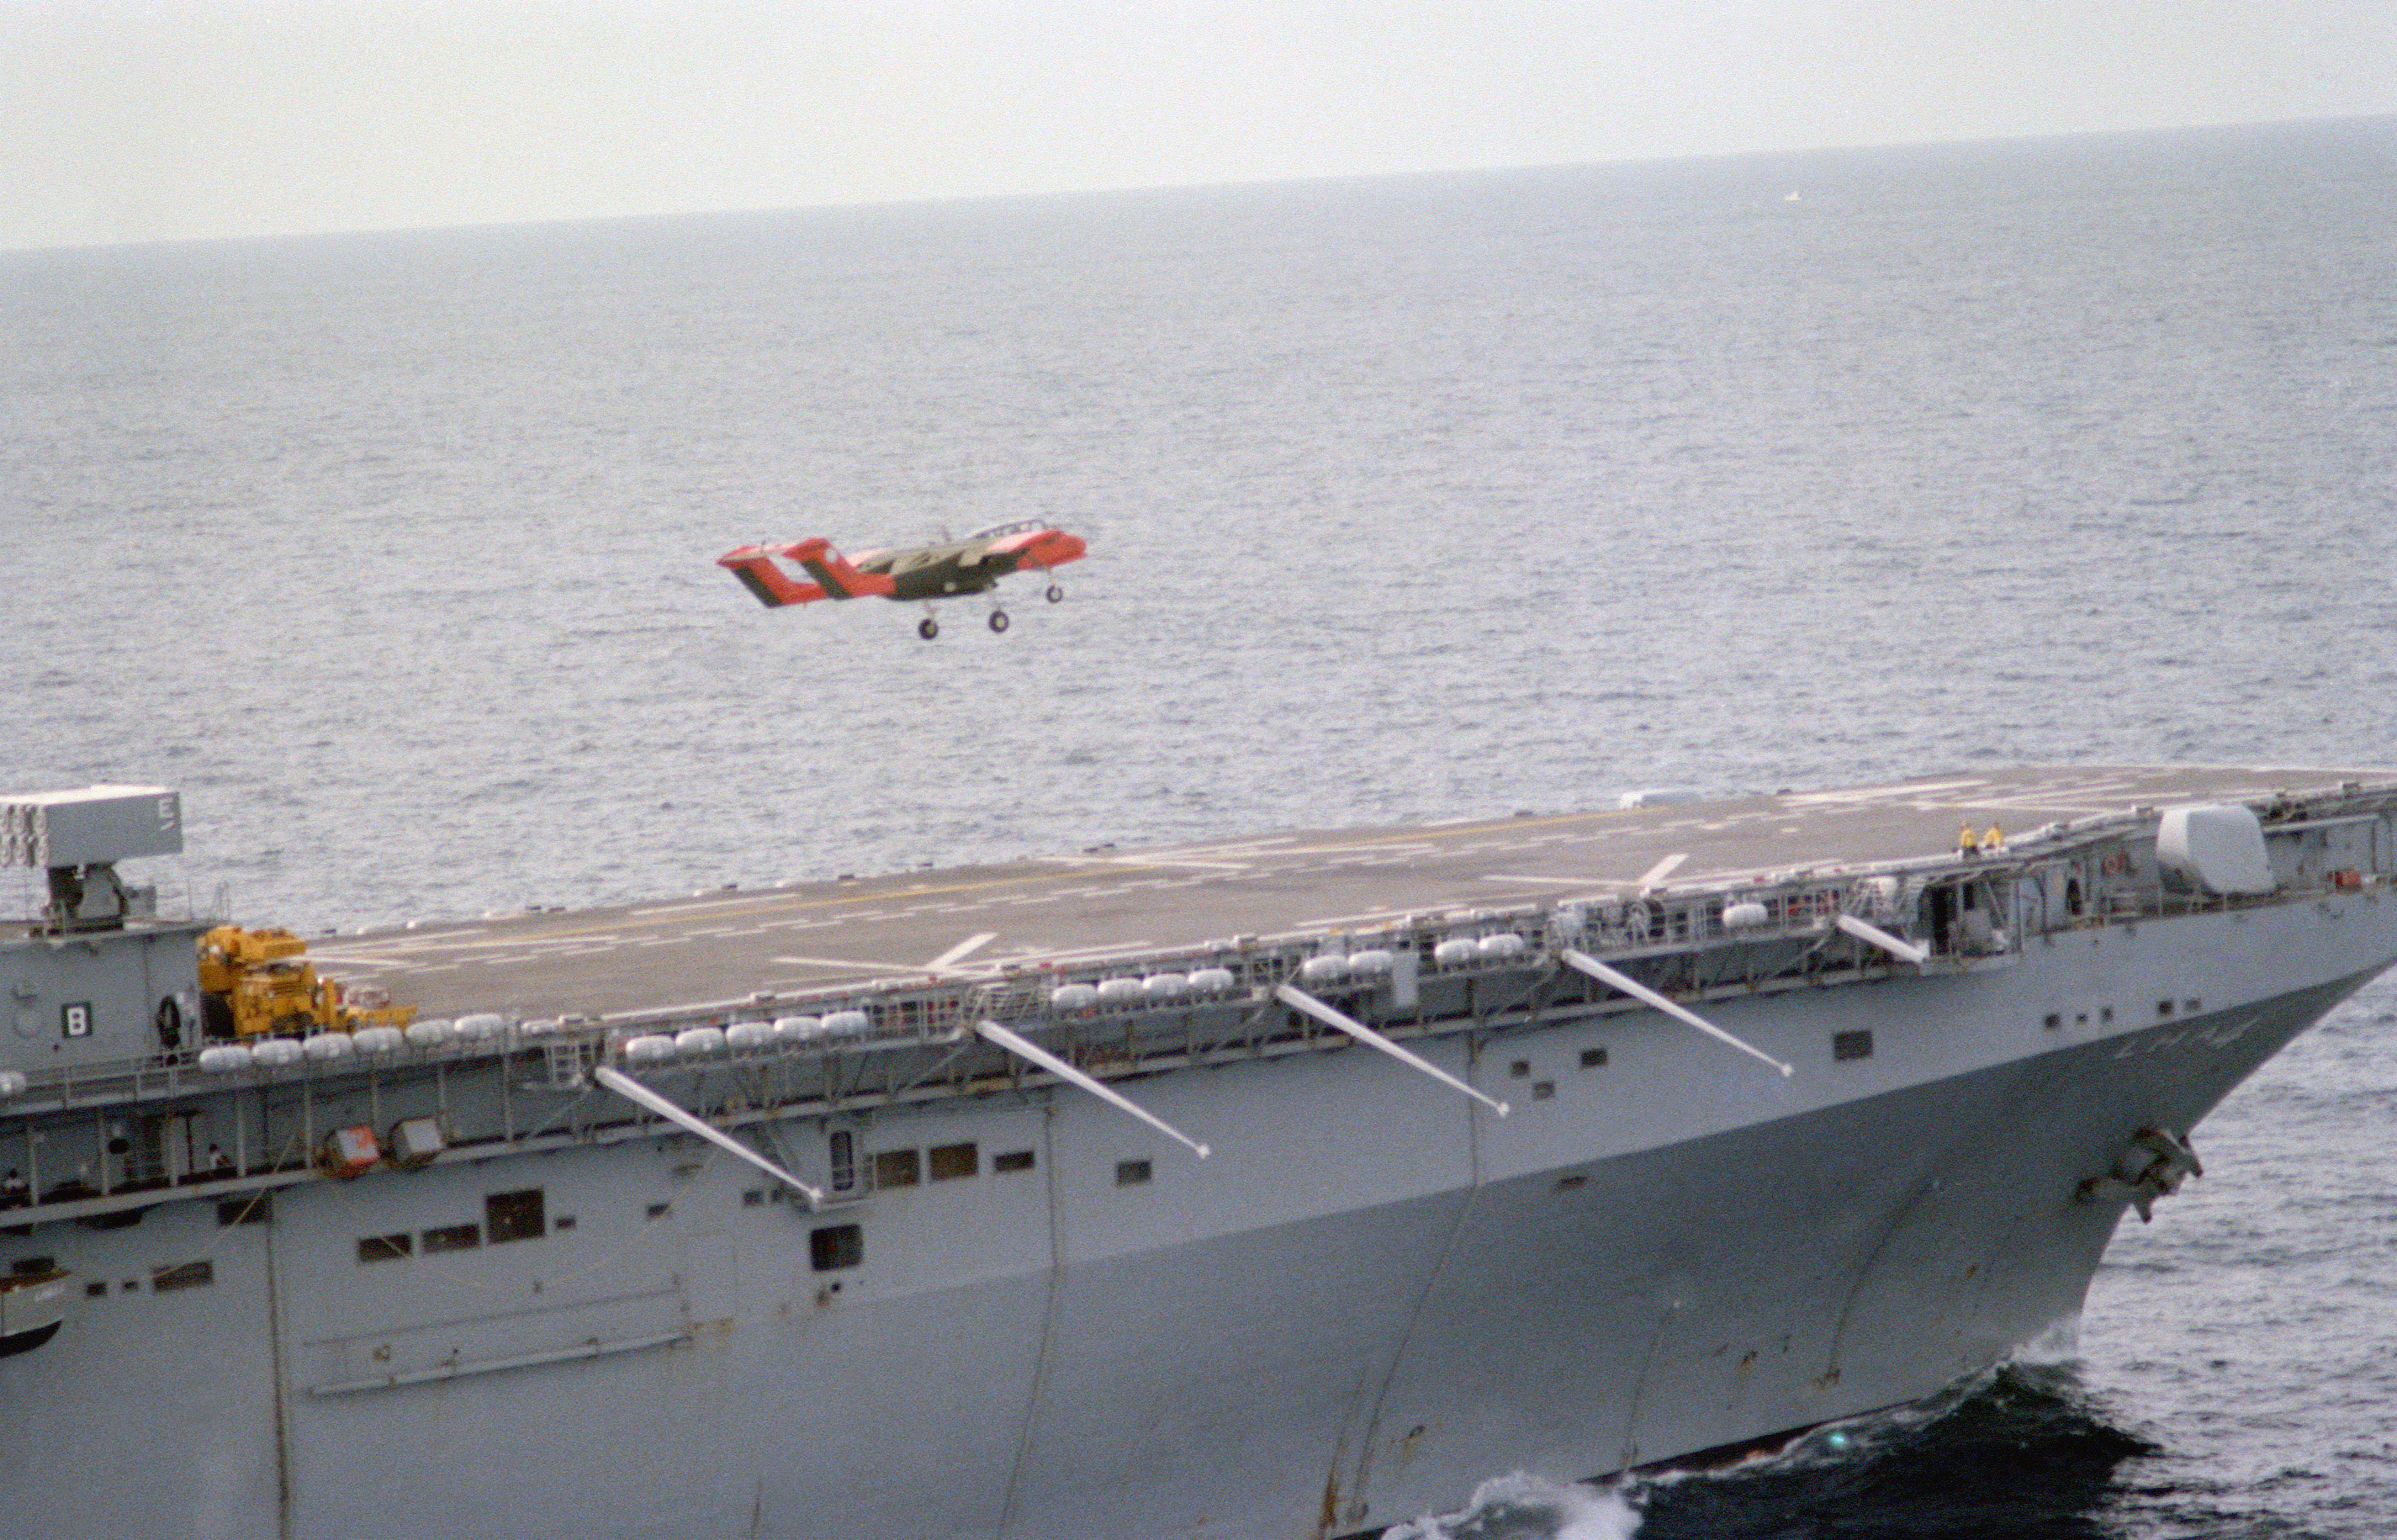 OV-10A_Bronco_of_VMO-1_takes_off_from_USS_Nassau_(LHA-4),_in_1983_(6429213).jpg